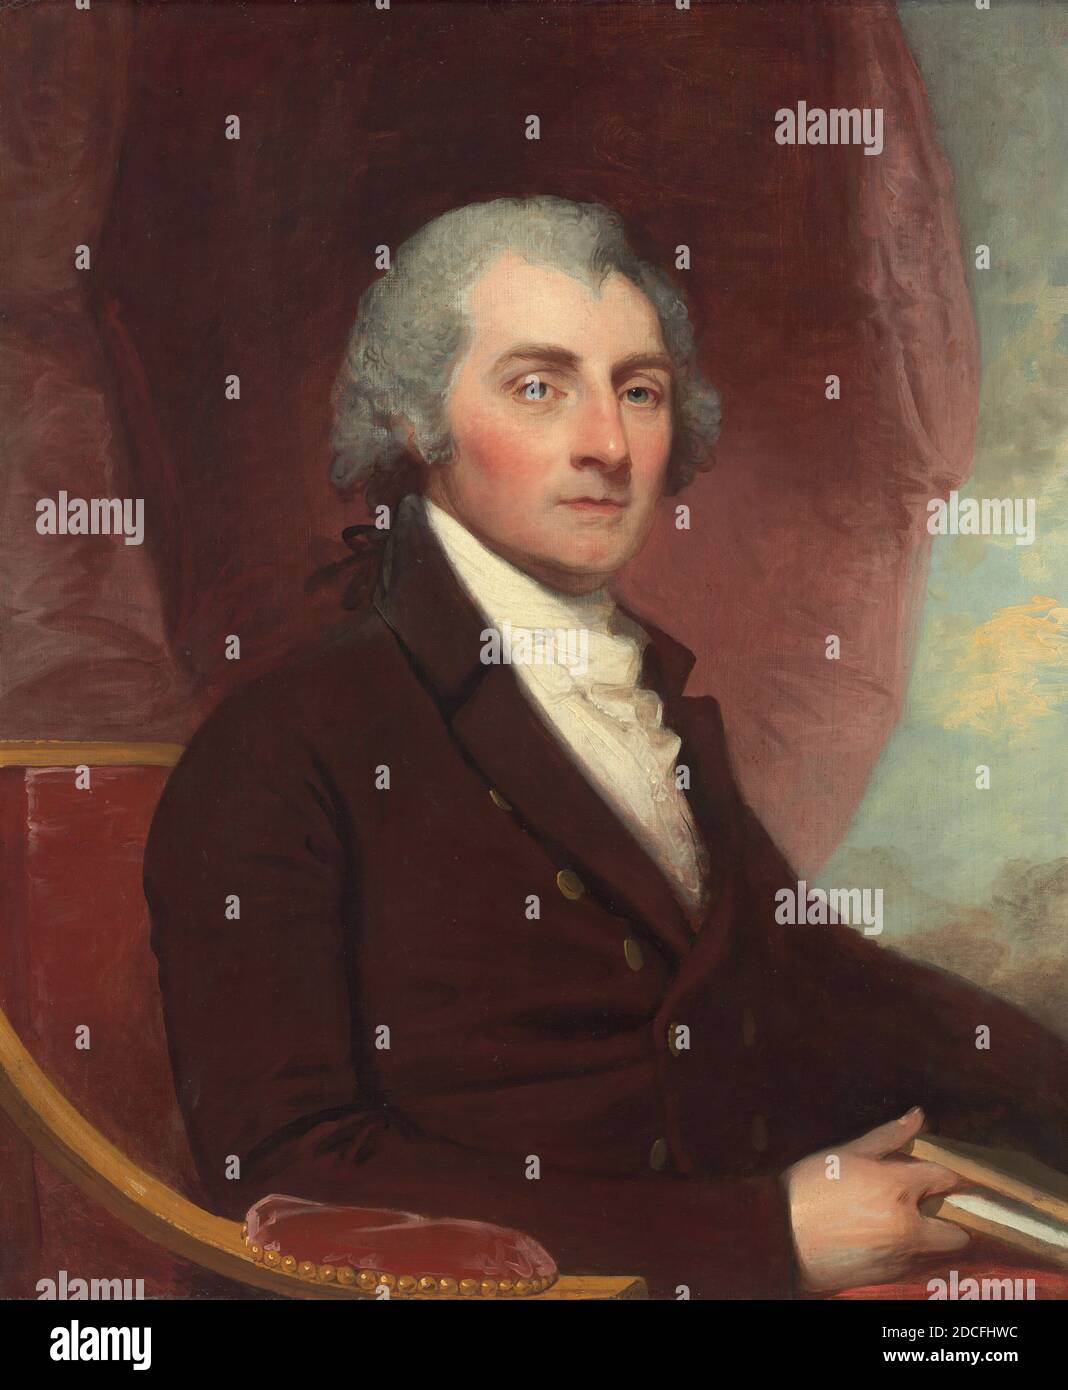 Gilbert Stuart, (painter), American, 1755 - 1828, William Thornton, 1804, oil on canvas, overall: 73.2 x 61.9 cm (28 13/16 x 24 3/8 in.), framed: 89.9 x 77.8 x 10.6 cm (35 3/8 x 30 5/8 x 4 3/16 in Stock Photo